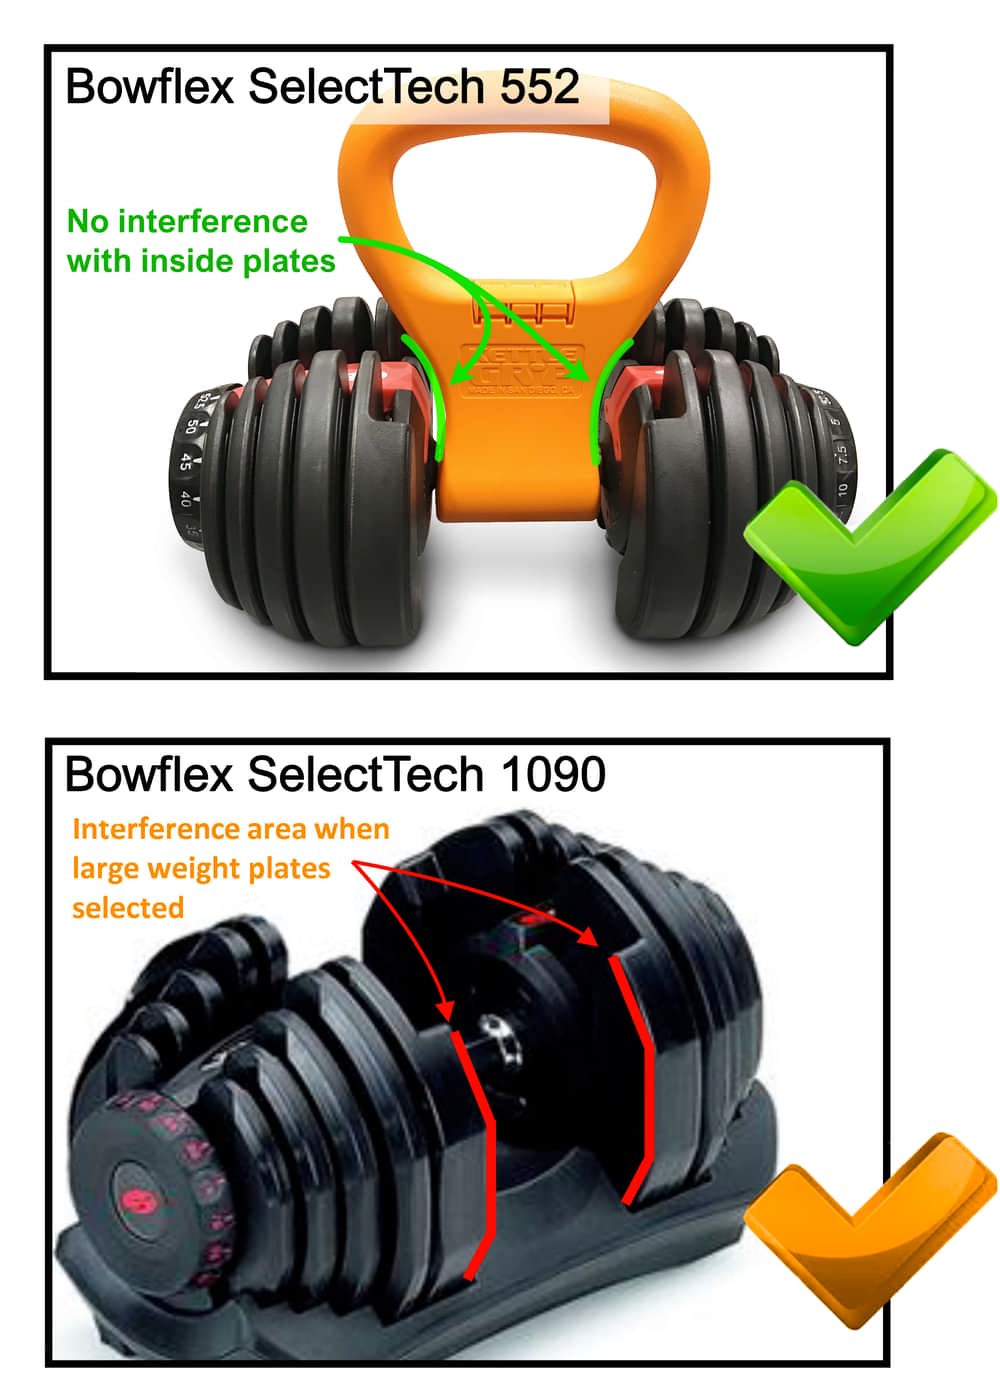 Kettle Gryp is compatible with Bowflex SelectTech 552 and SelectTech 1090